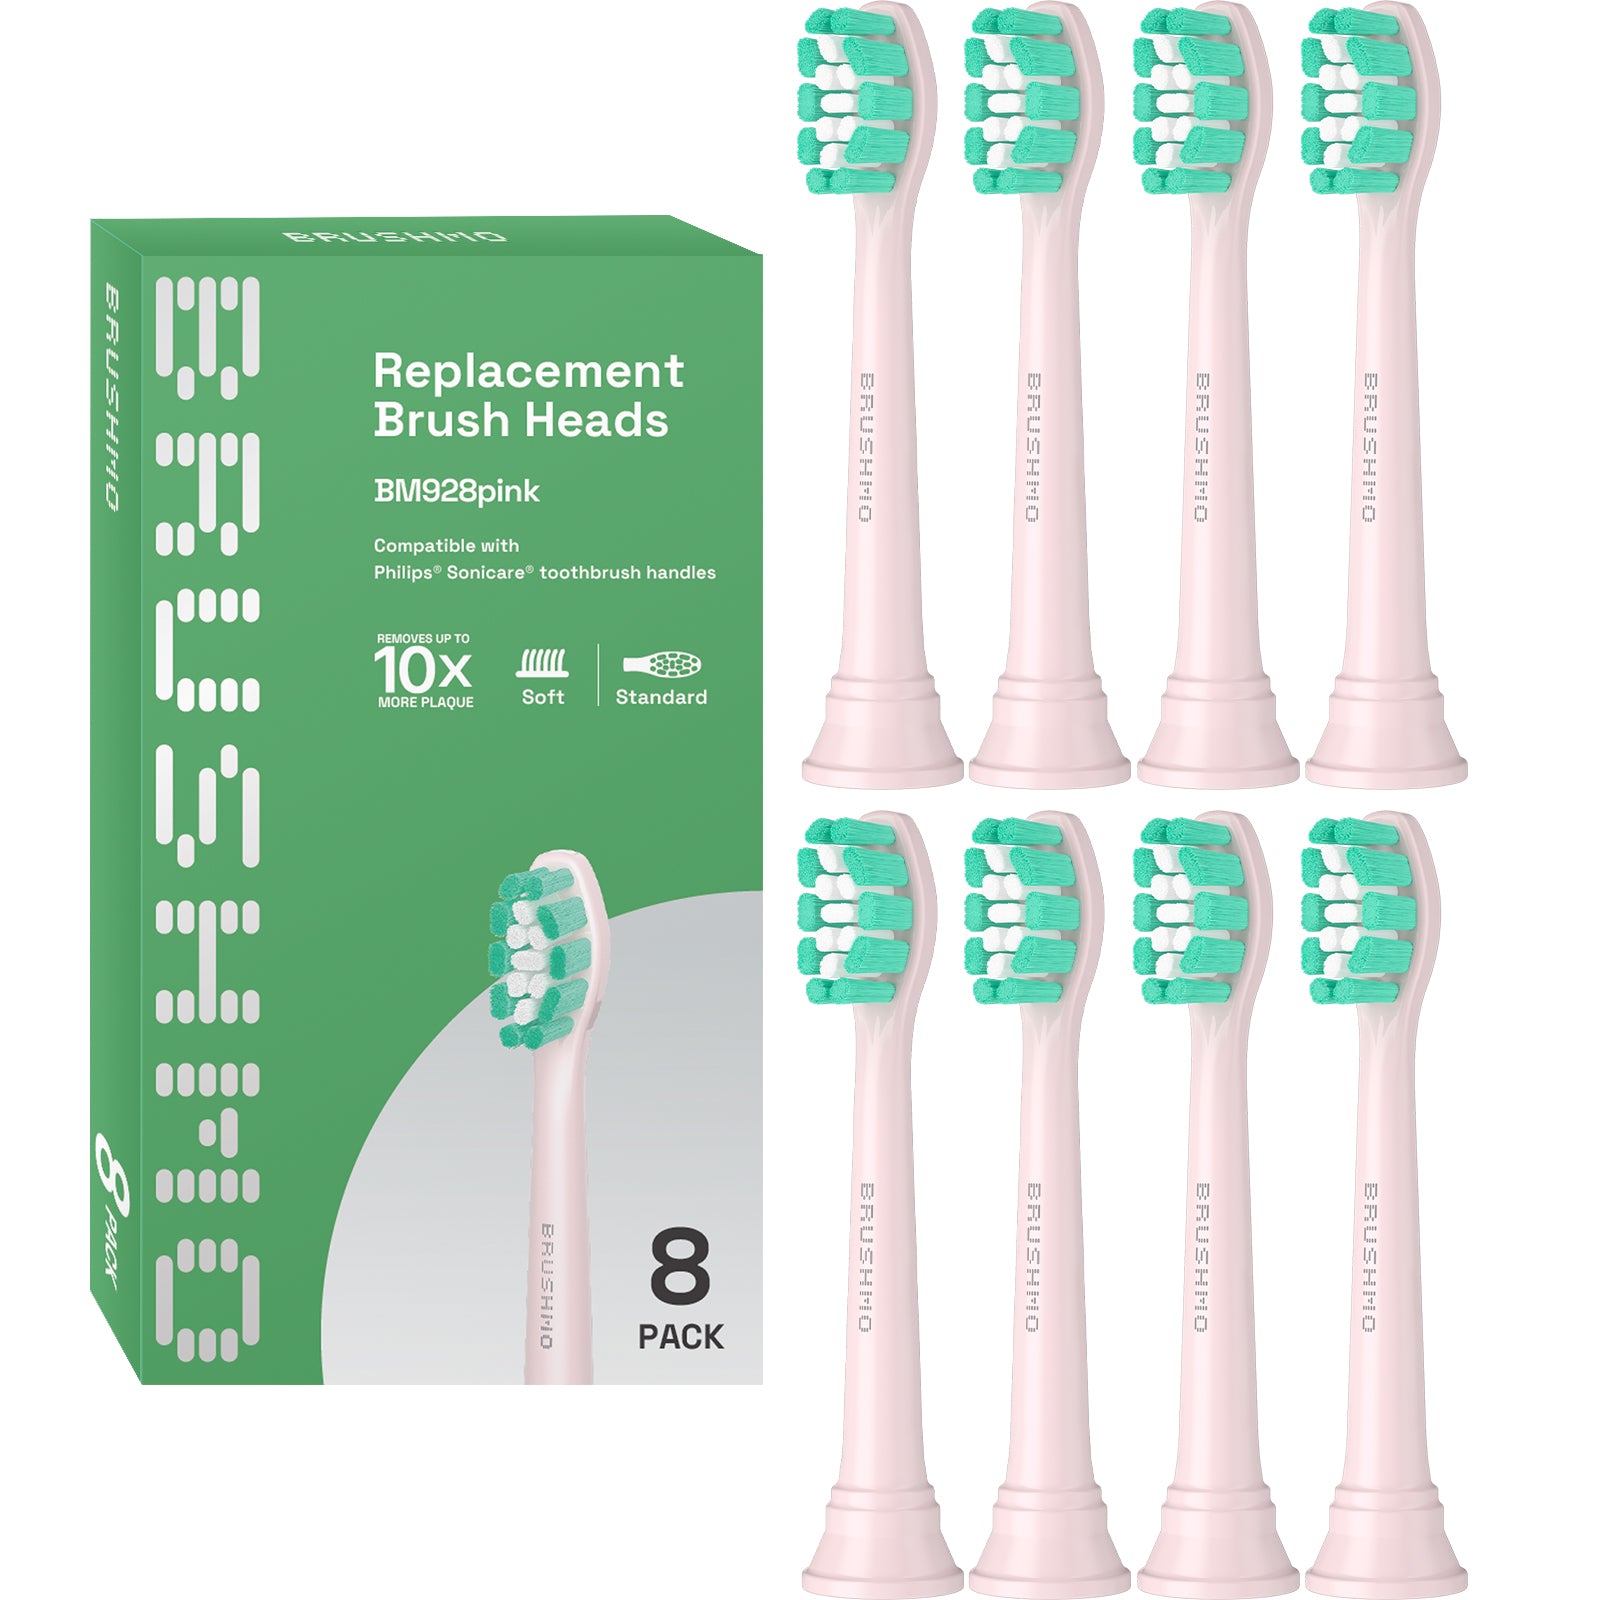 Brushmo Replacement Toothbrush Heads Compatible with Philips Sonicare Electric Toothbrush, pink, 8 Pack